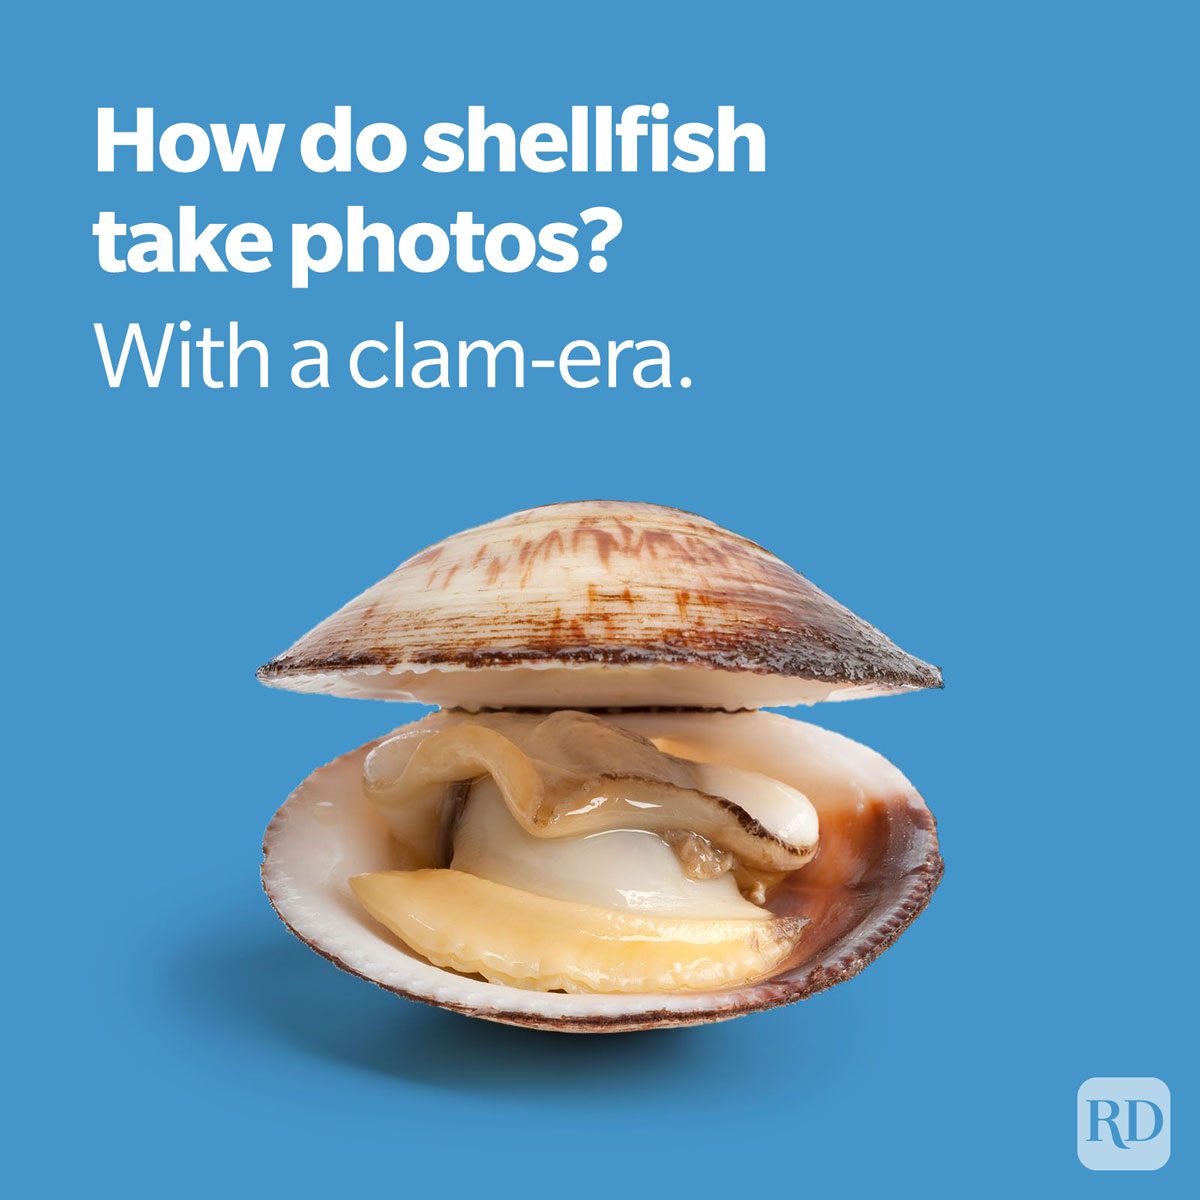 fish pun about shellfish taking photos with a clam-era